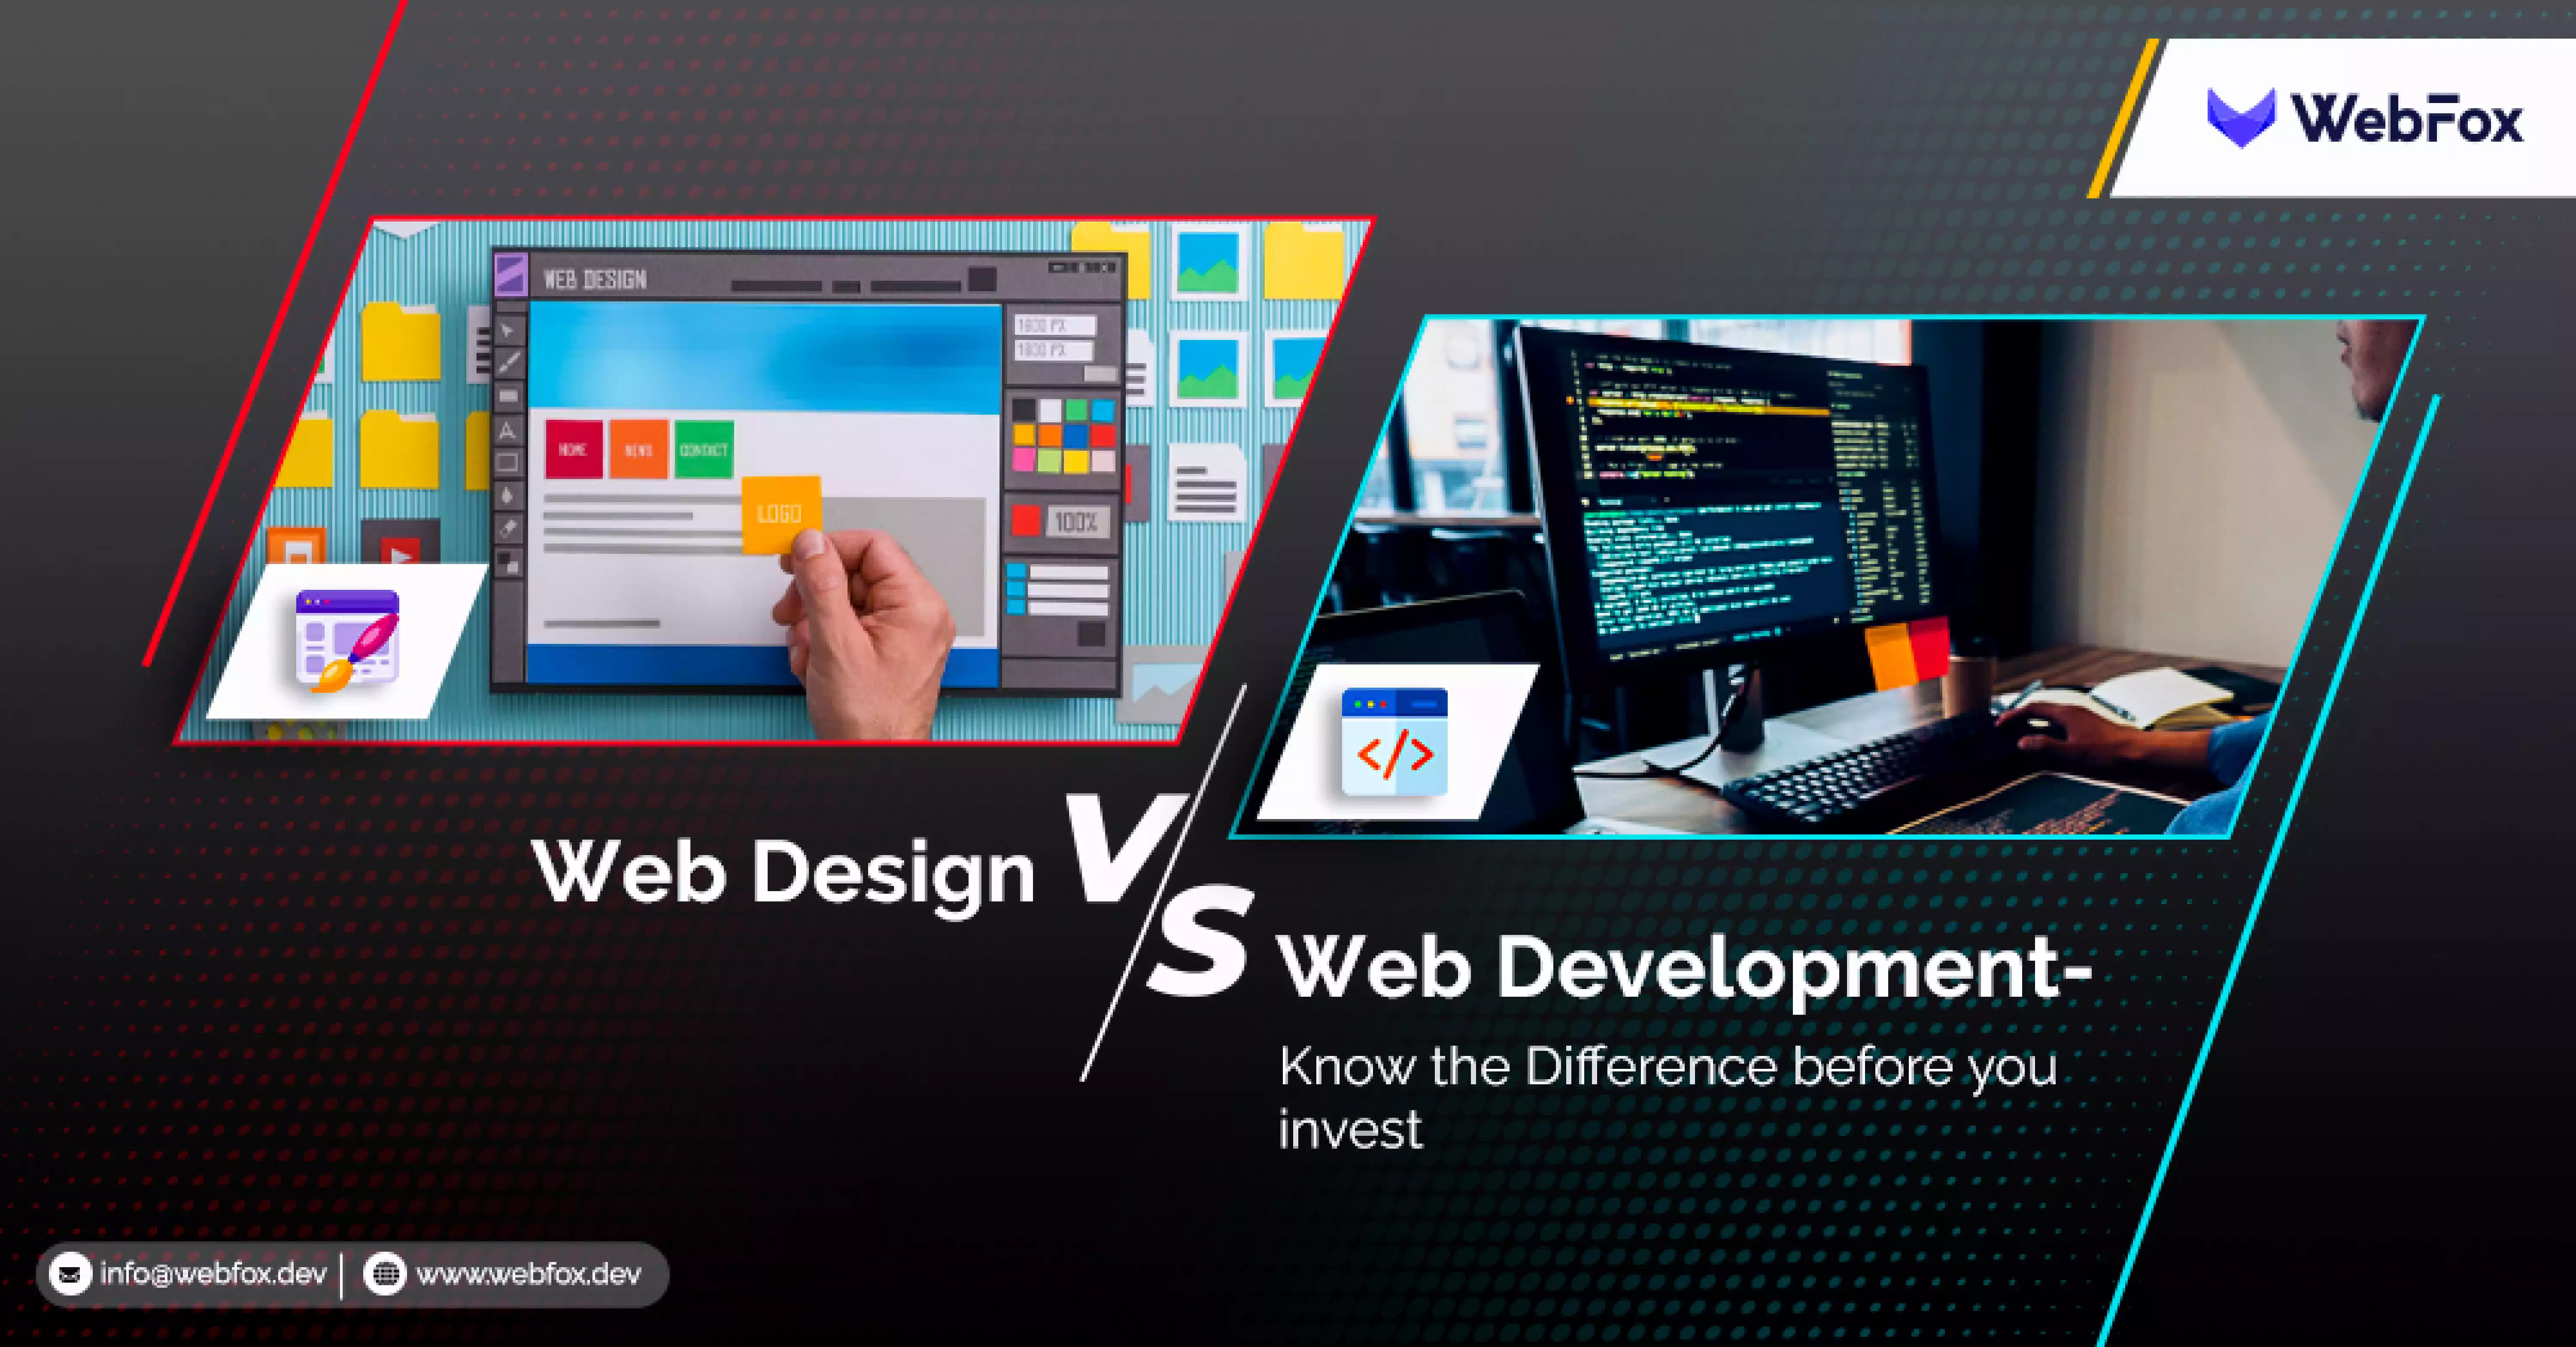 Web Design vs. Web Development- Know the Difference before you invest